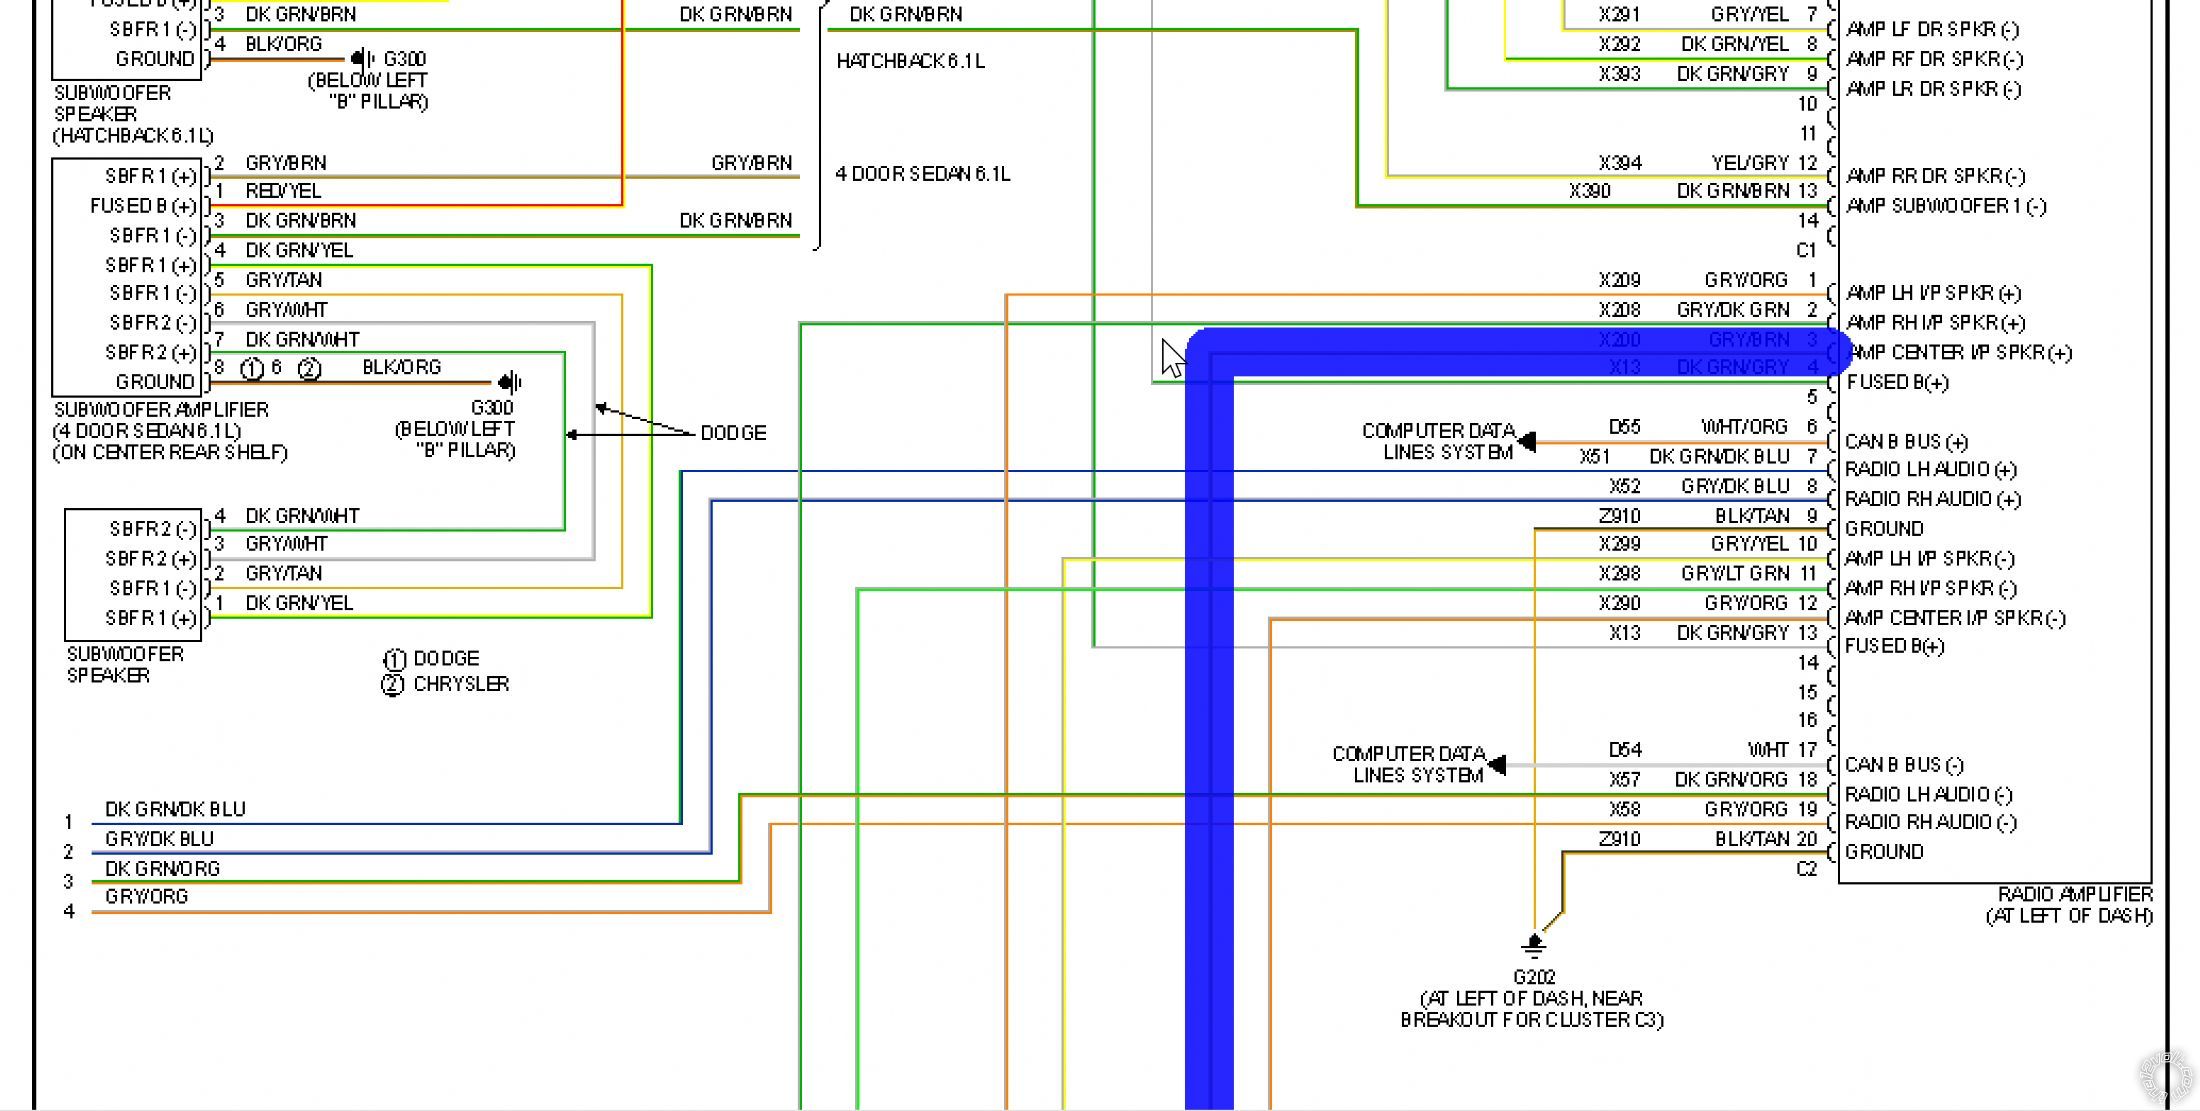 [DIAGRAM] Ground Wiring Diagram 2008 Dodge Charger FULL Version HD